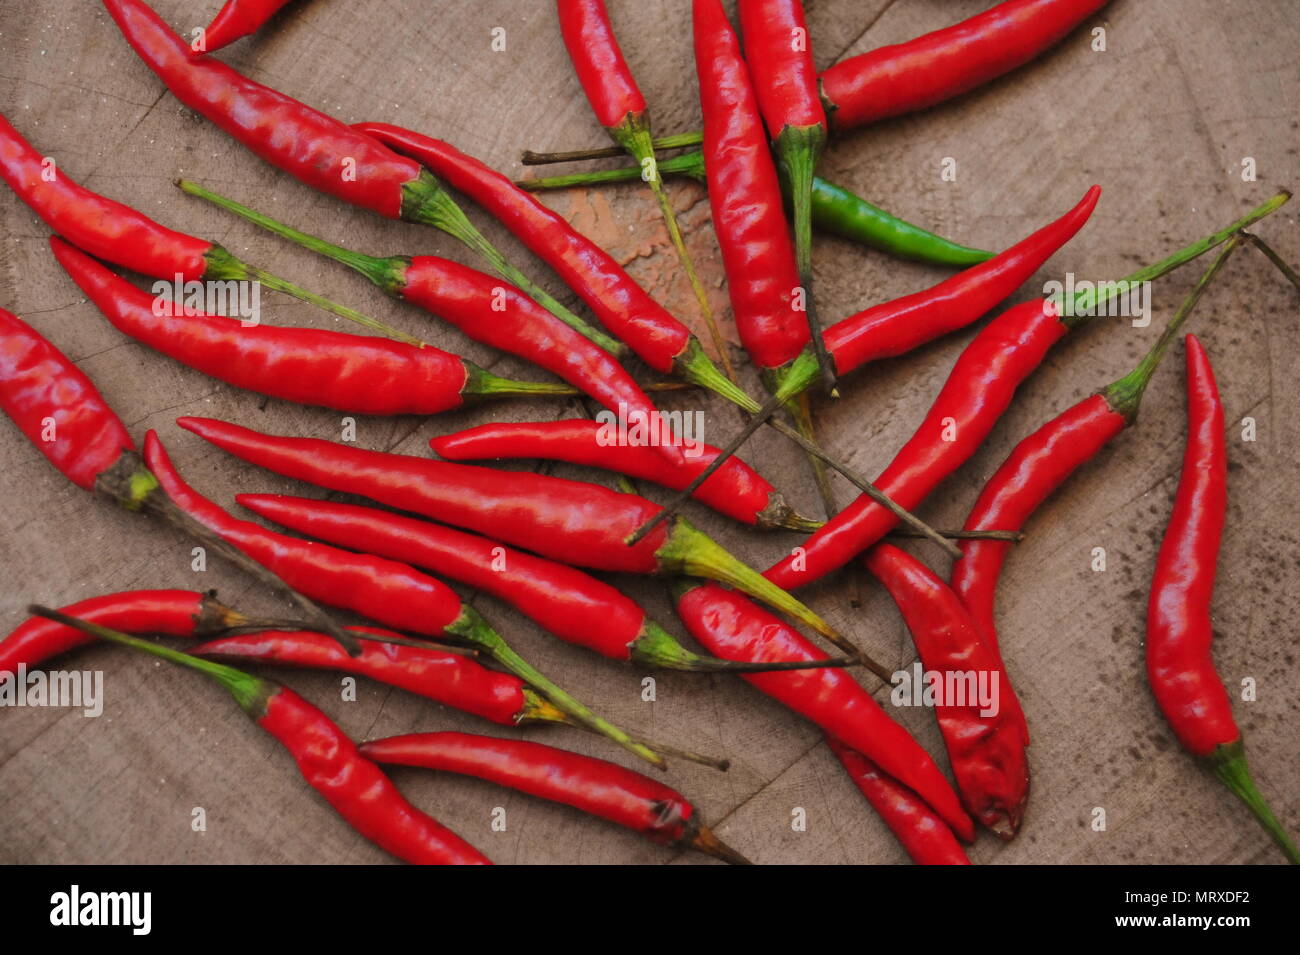 Red Hot Chili Peppers, Philippines Stock Photo